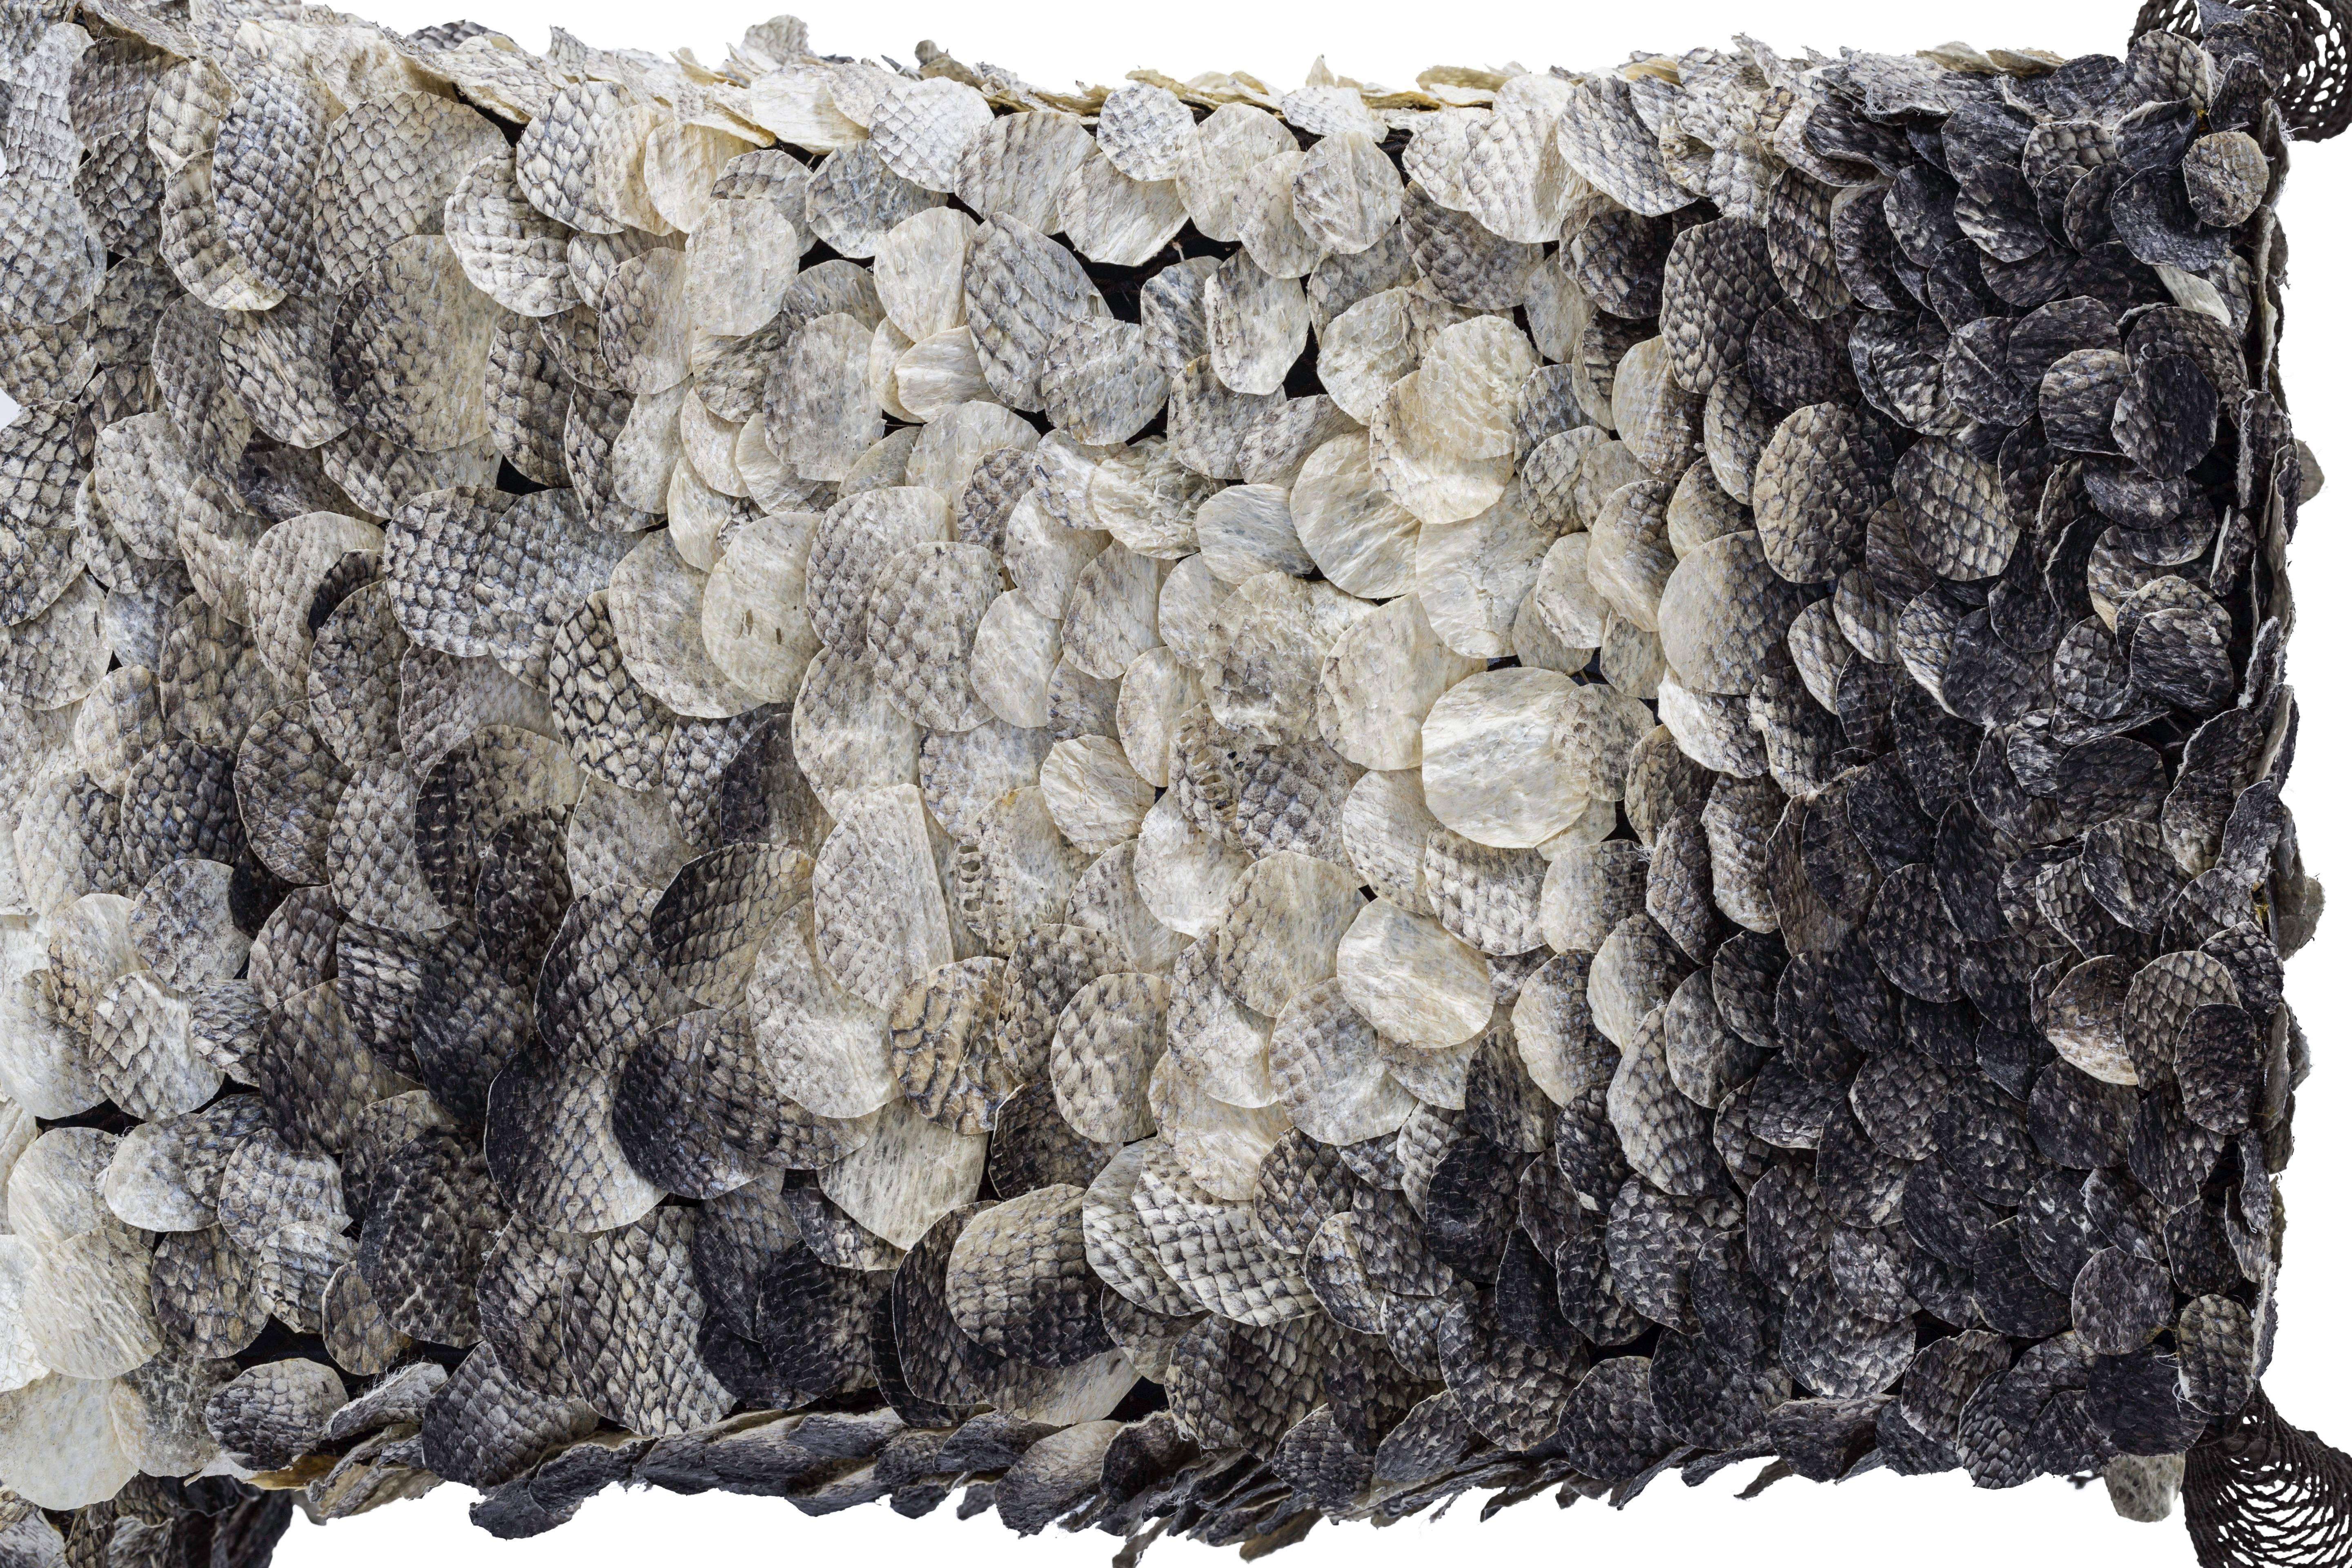 Hoogvliet’s “Re-Sea Me” is a rug made from the discarded skins of salmon, collected as wasted by-products from the local fish shops in her area. By tanning the discarded fish skins and treating them without chemicals, Nienke produced a strong,